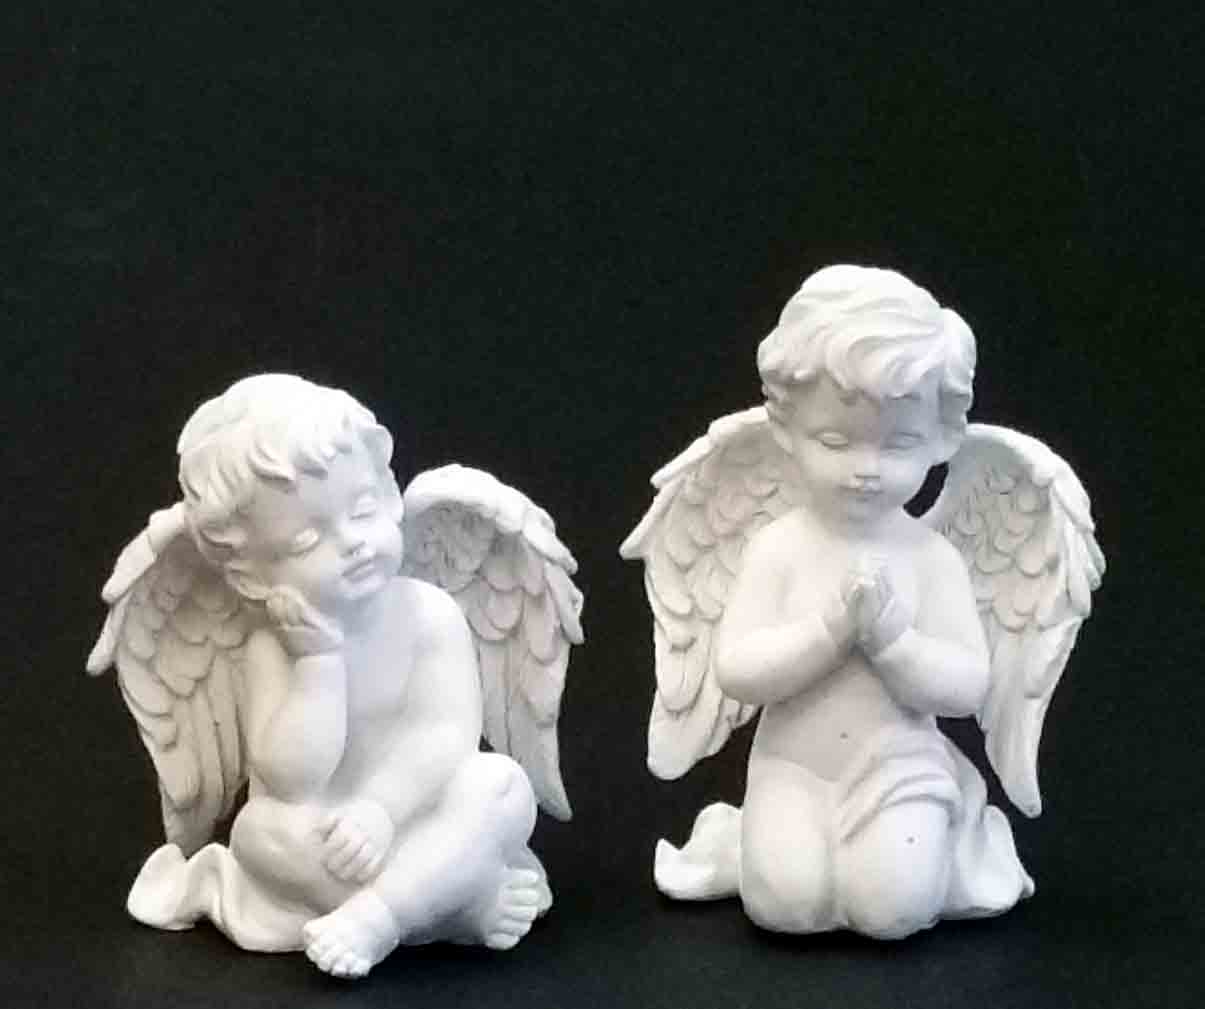 2049 - 3.5 and 4" Sitting Angels - 9.95 box of 2